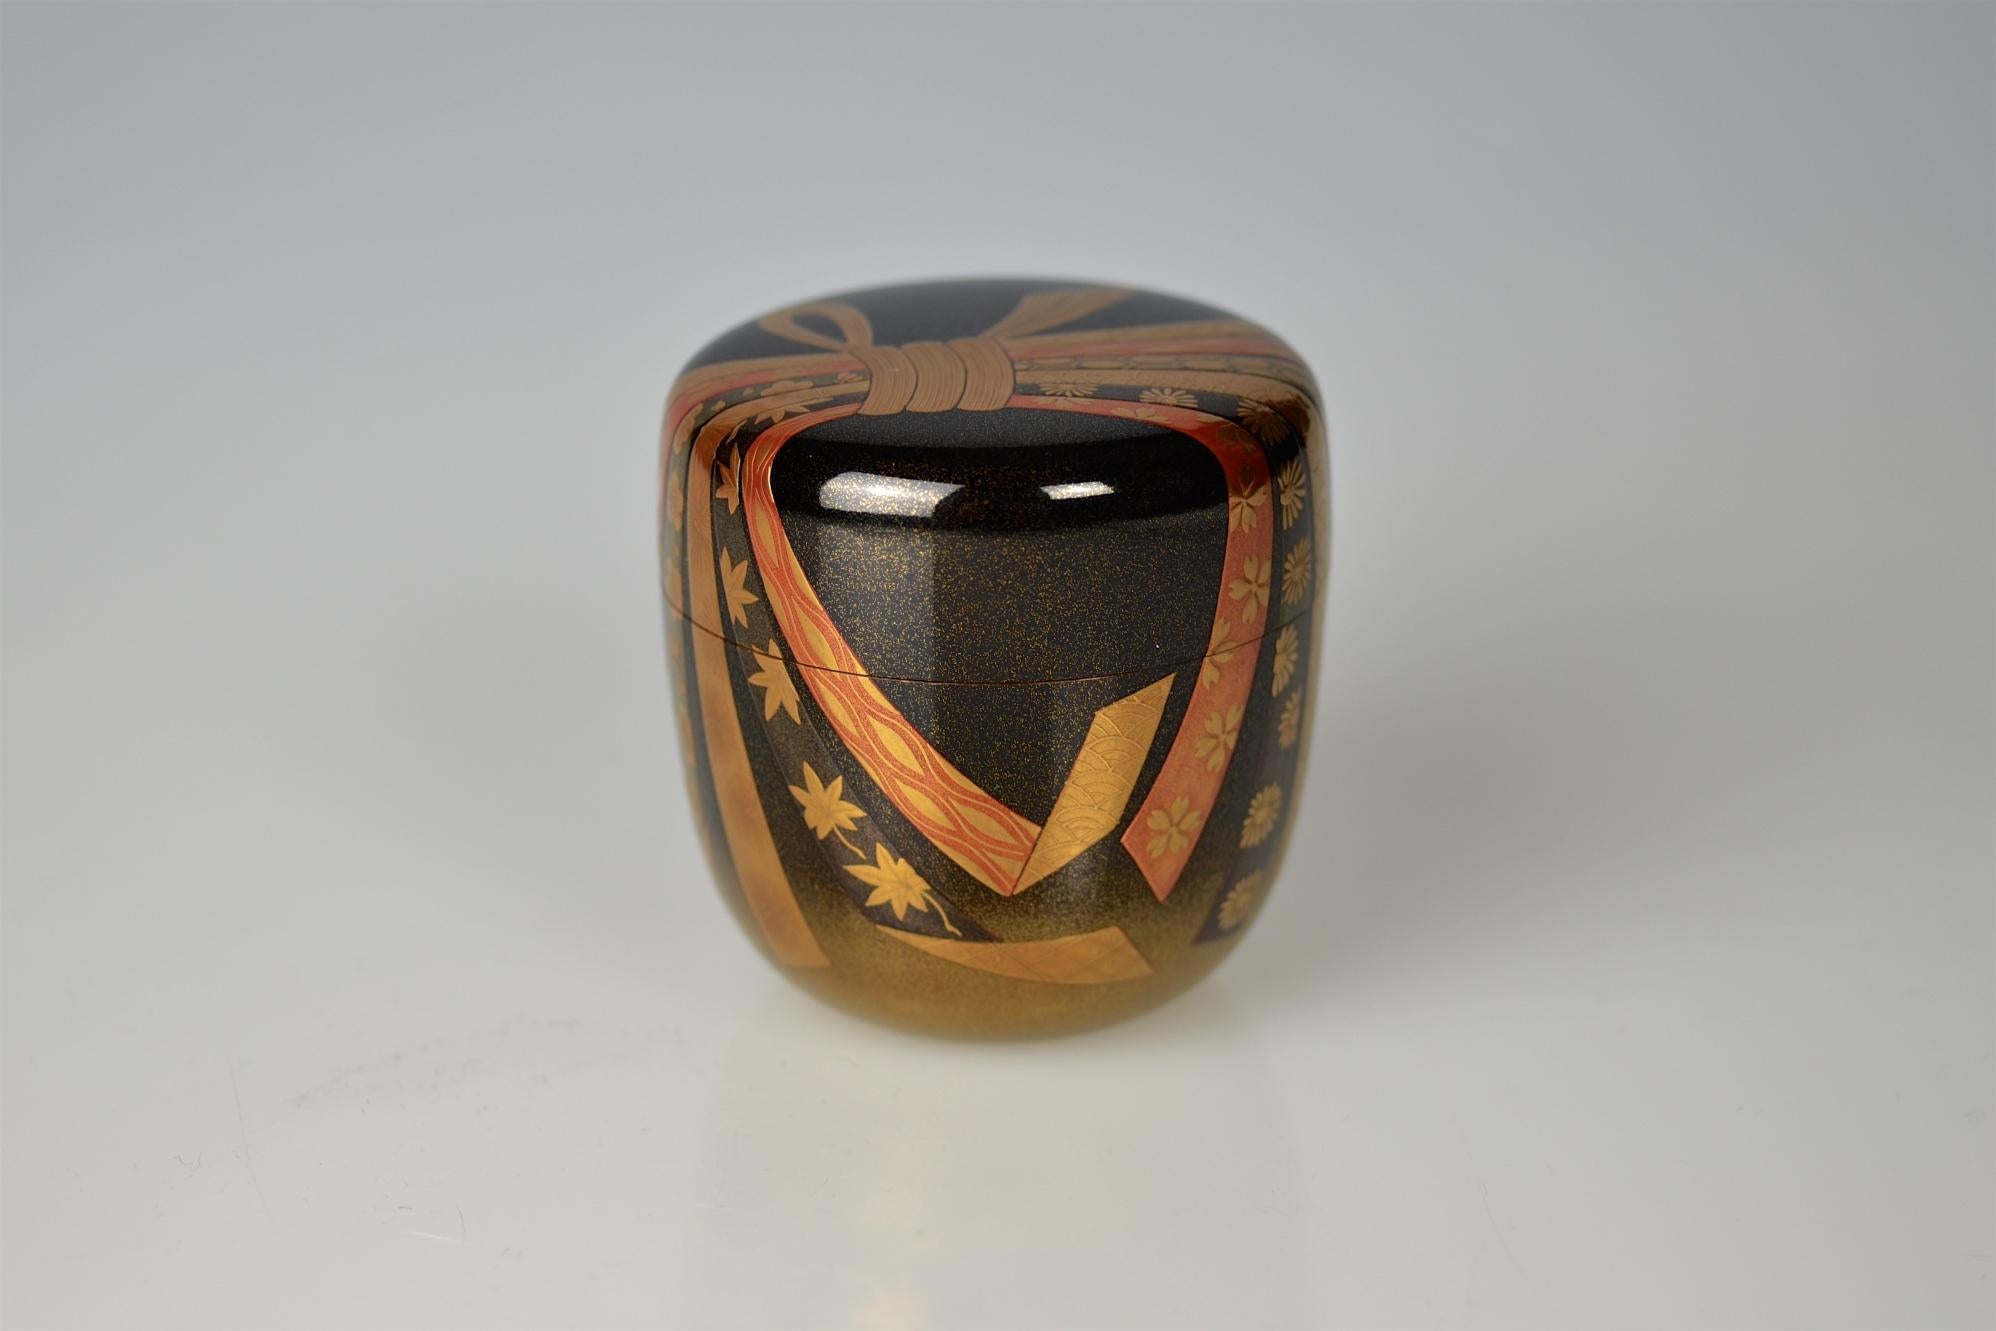 Japanese Gold Lacquer Tea Caddy (Natsume) with festive knot by Ichigo Itcho (1898-1991) For Sale